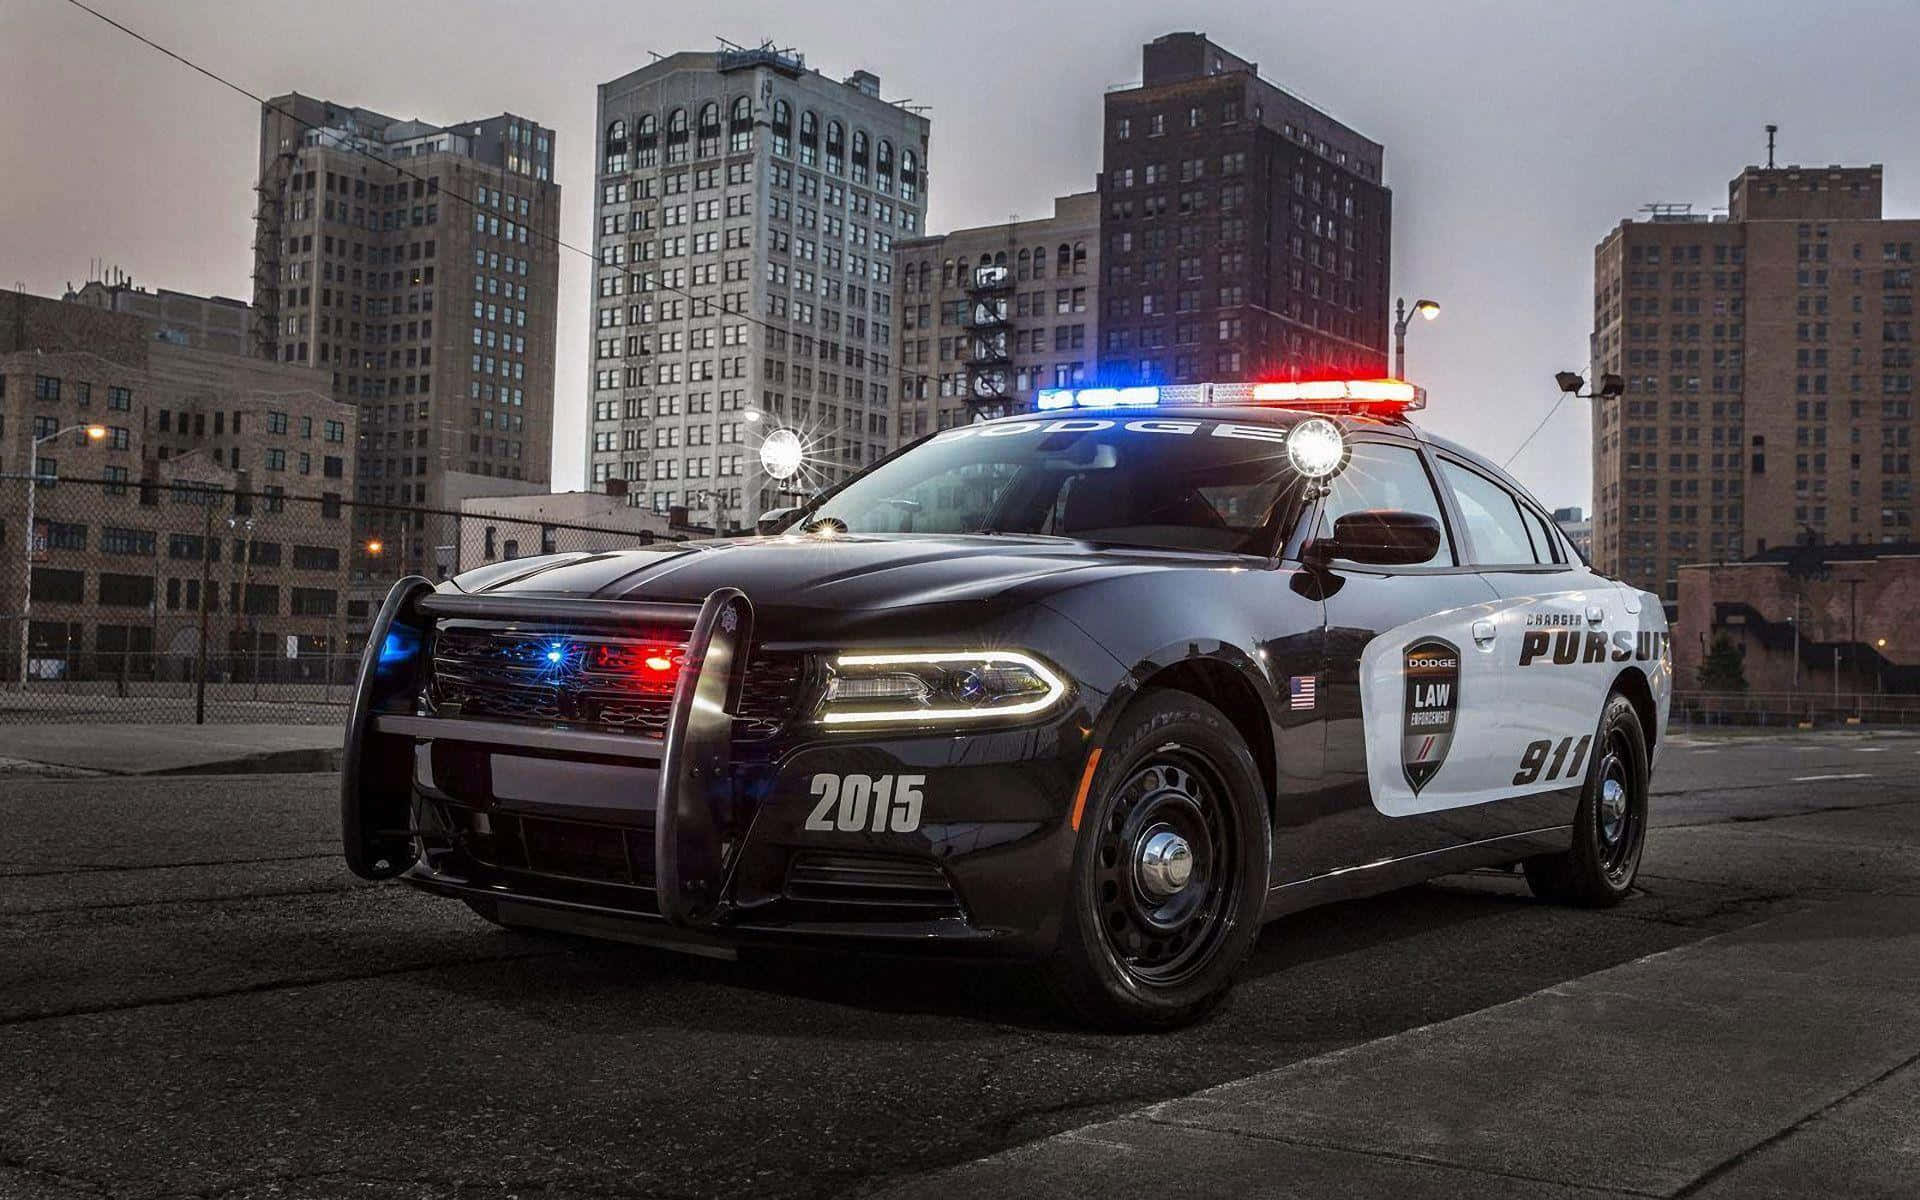 A Police Car Is Parked In Front Of A City